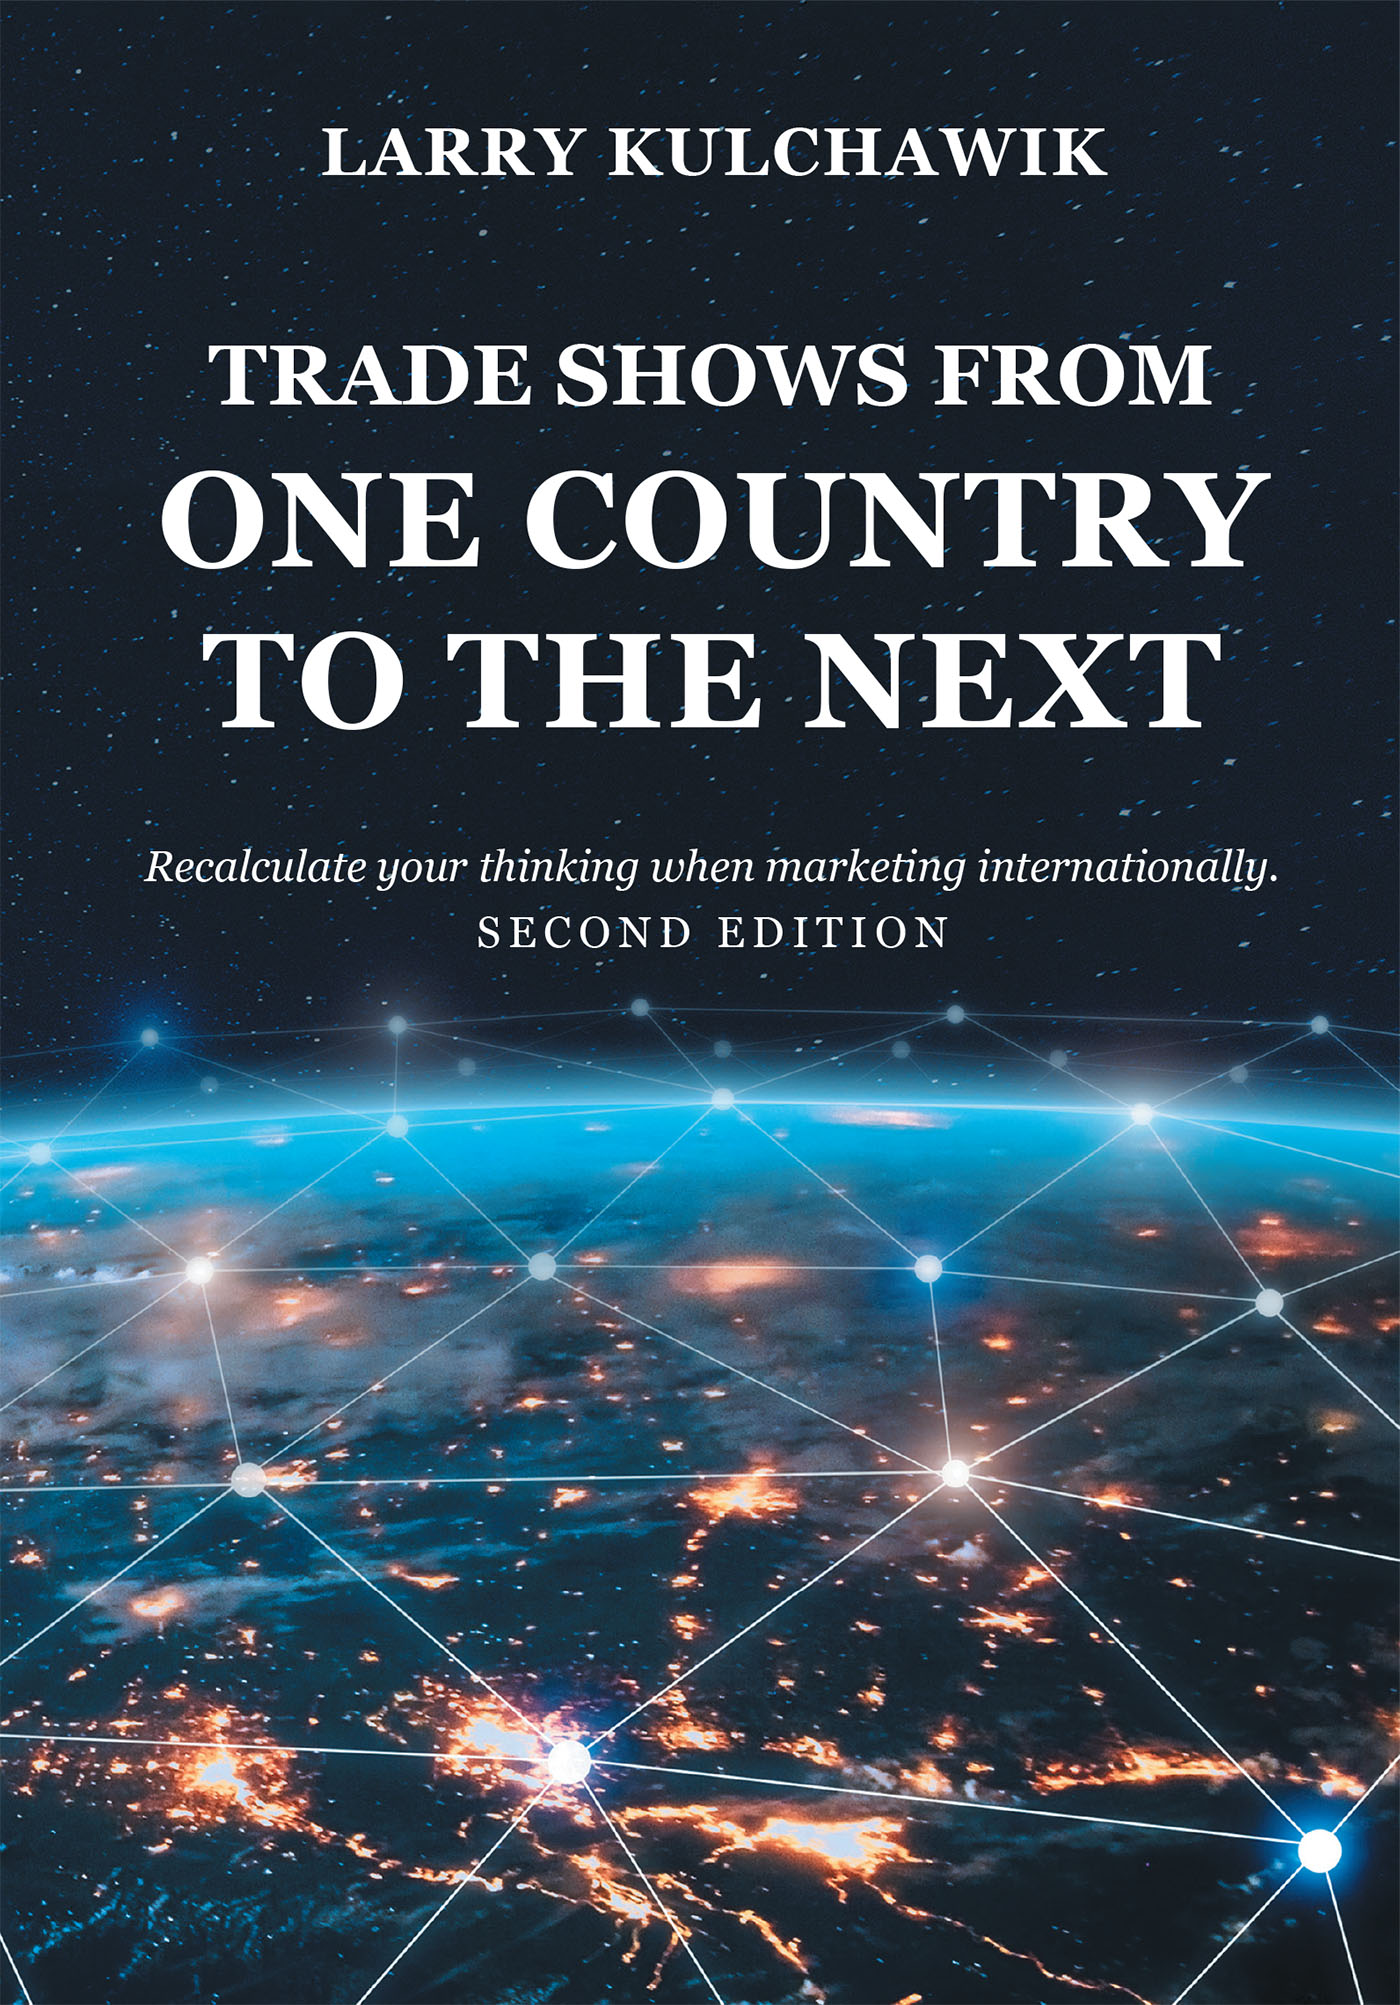 Larry Kulchawik S Book Trade Shows From One Country To